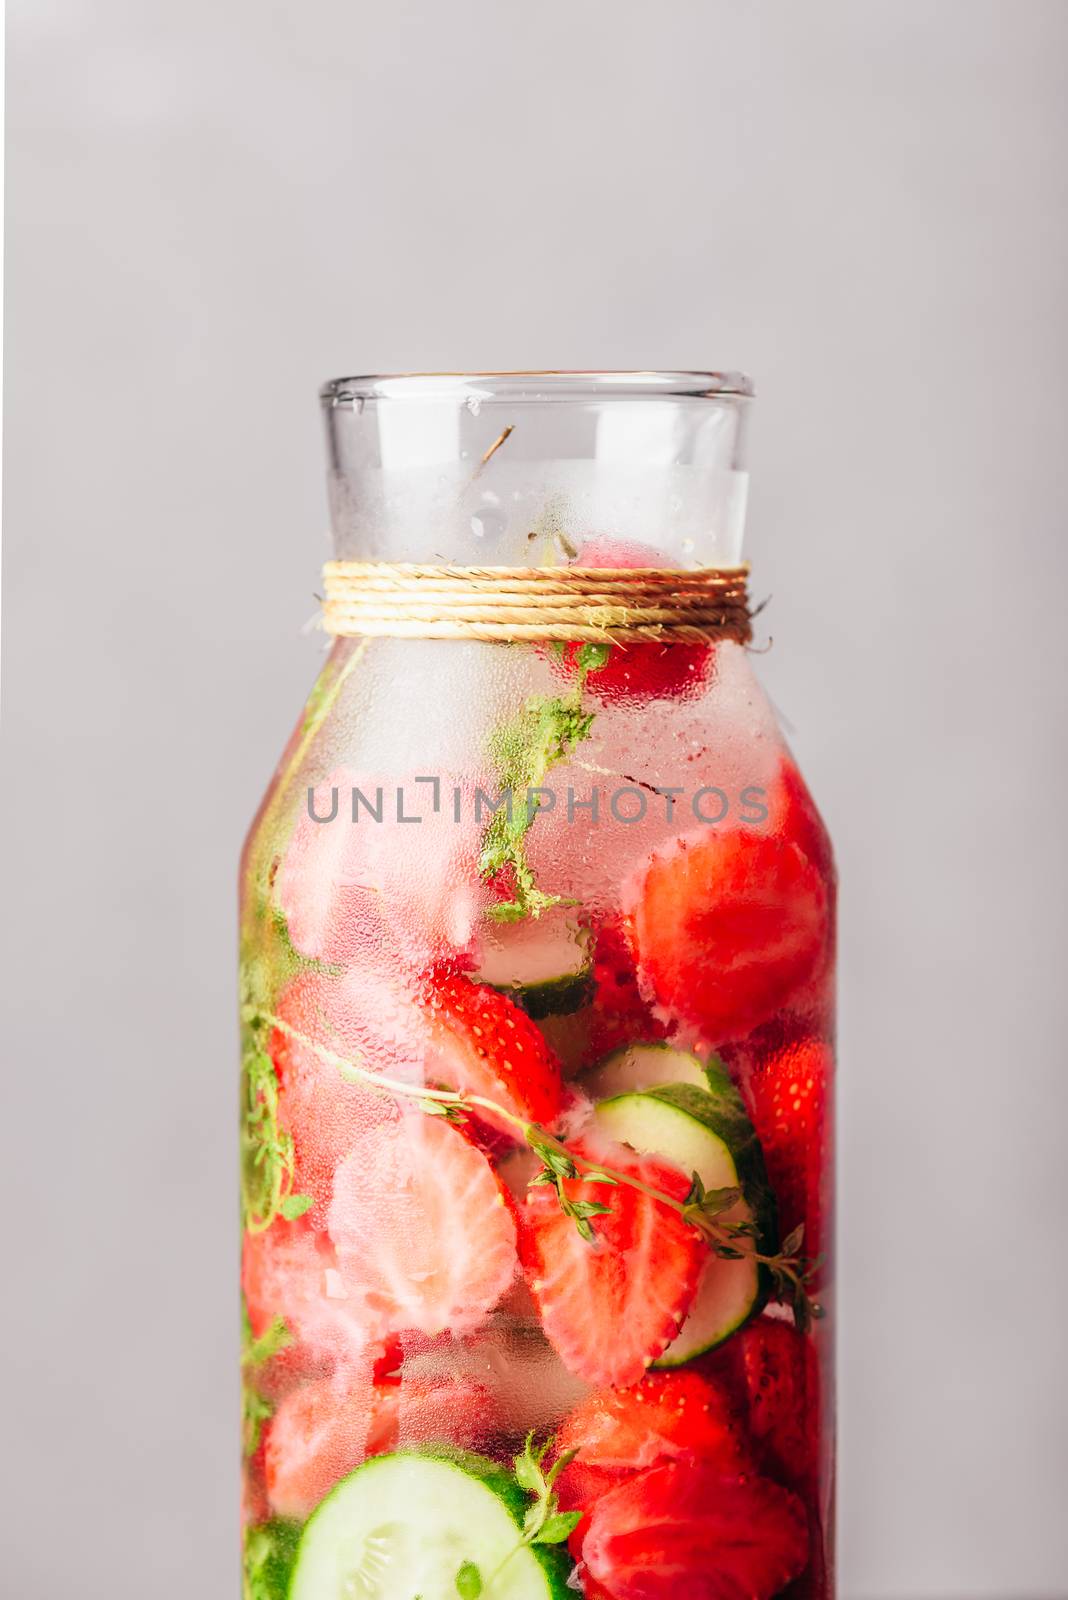 Part of Bottle with Infused Water, Fresh Strawberry, Sliced Cucumber and Springs of Thyme. Vertical Orientation.